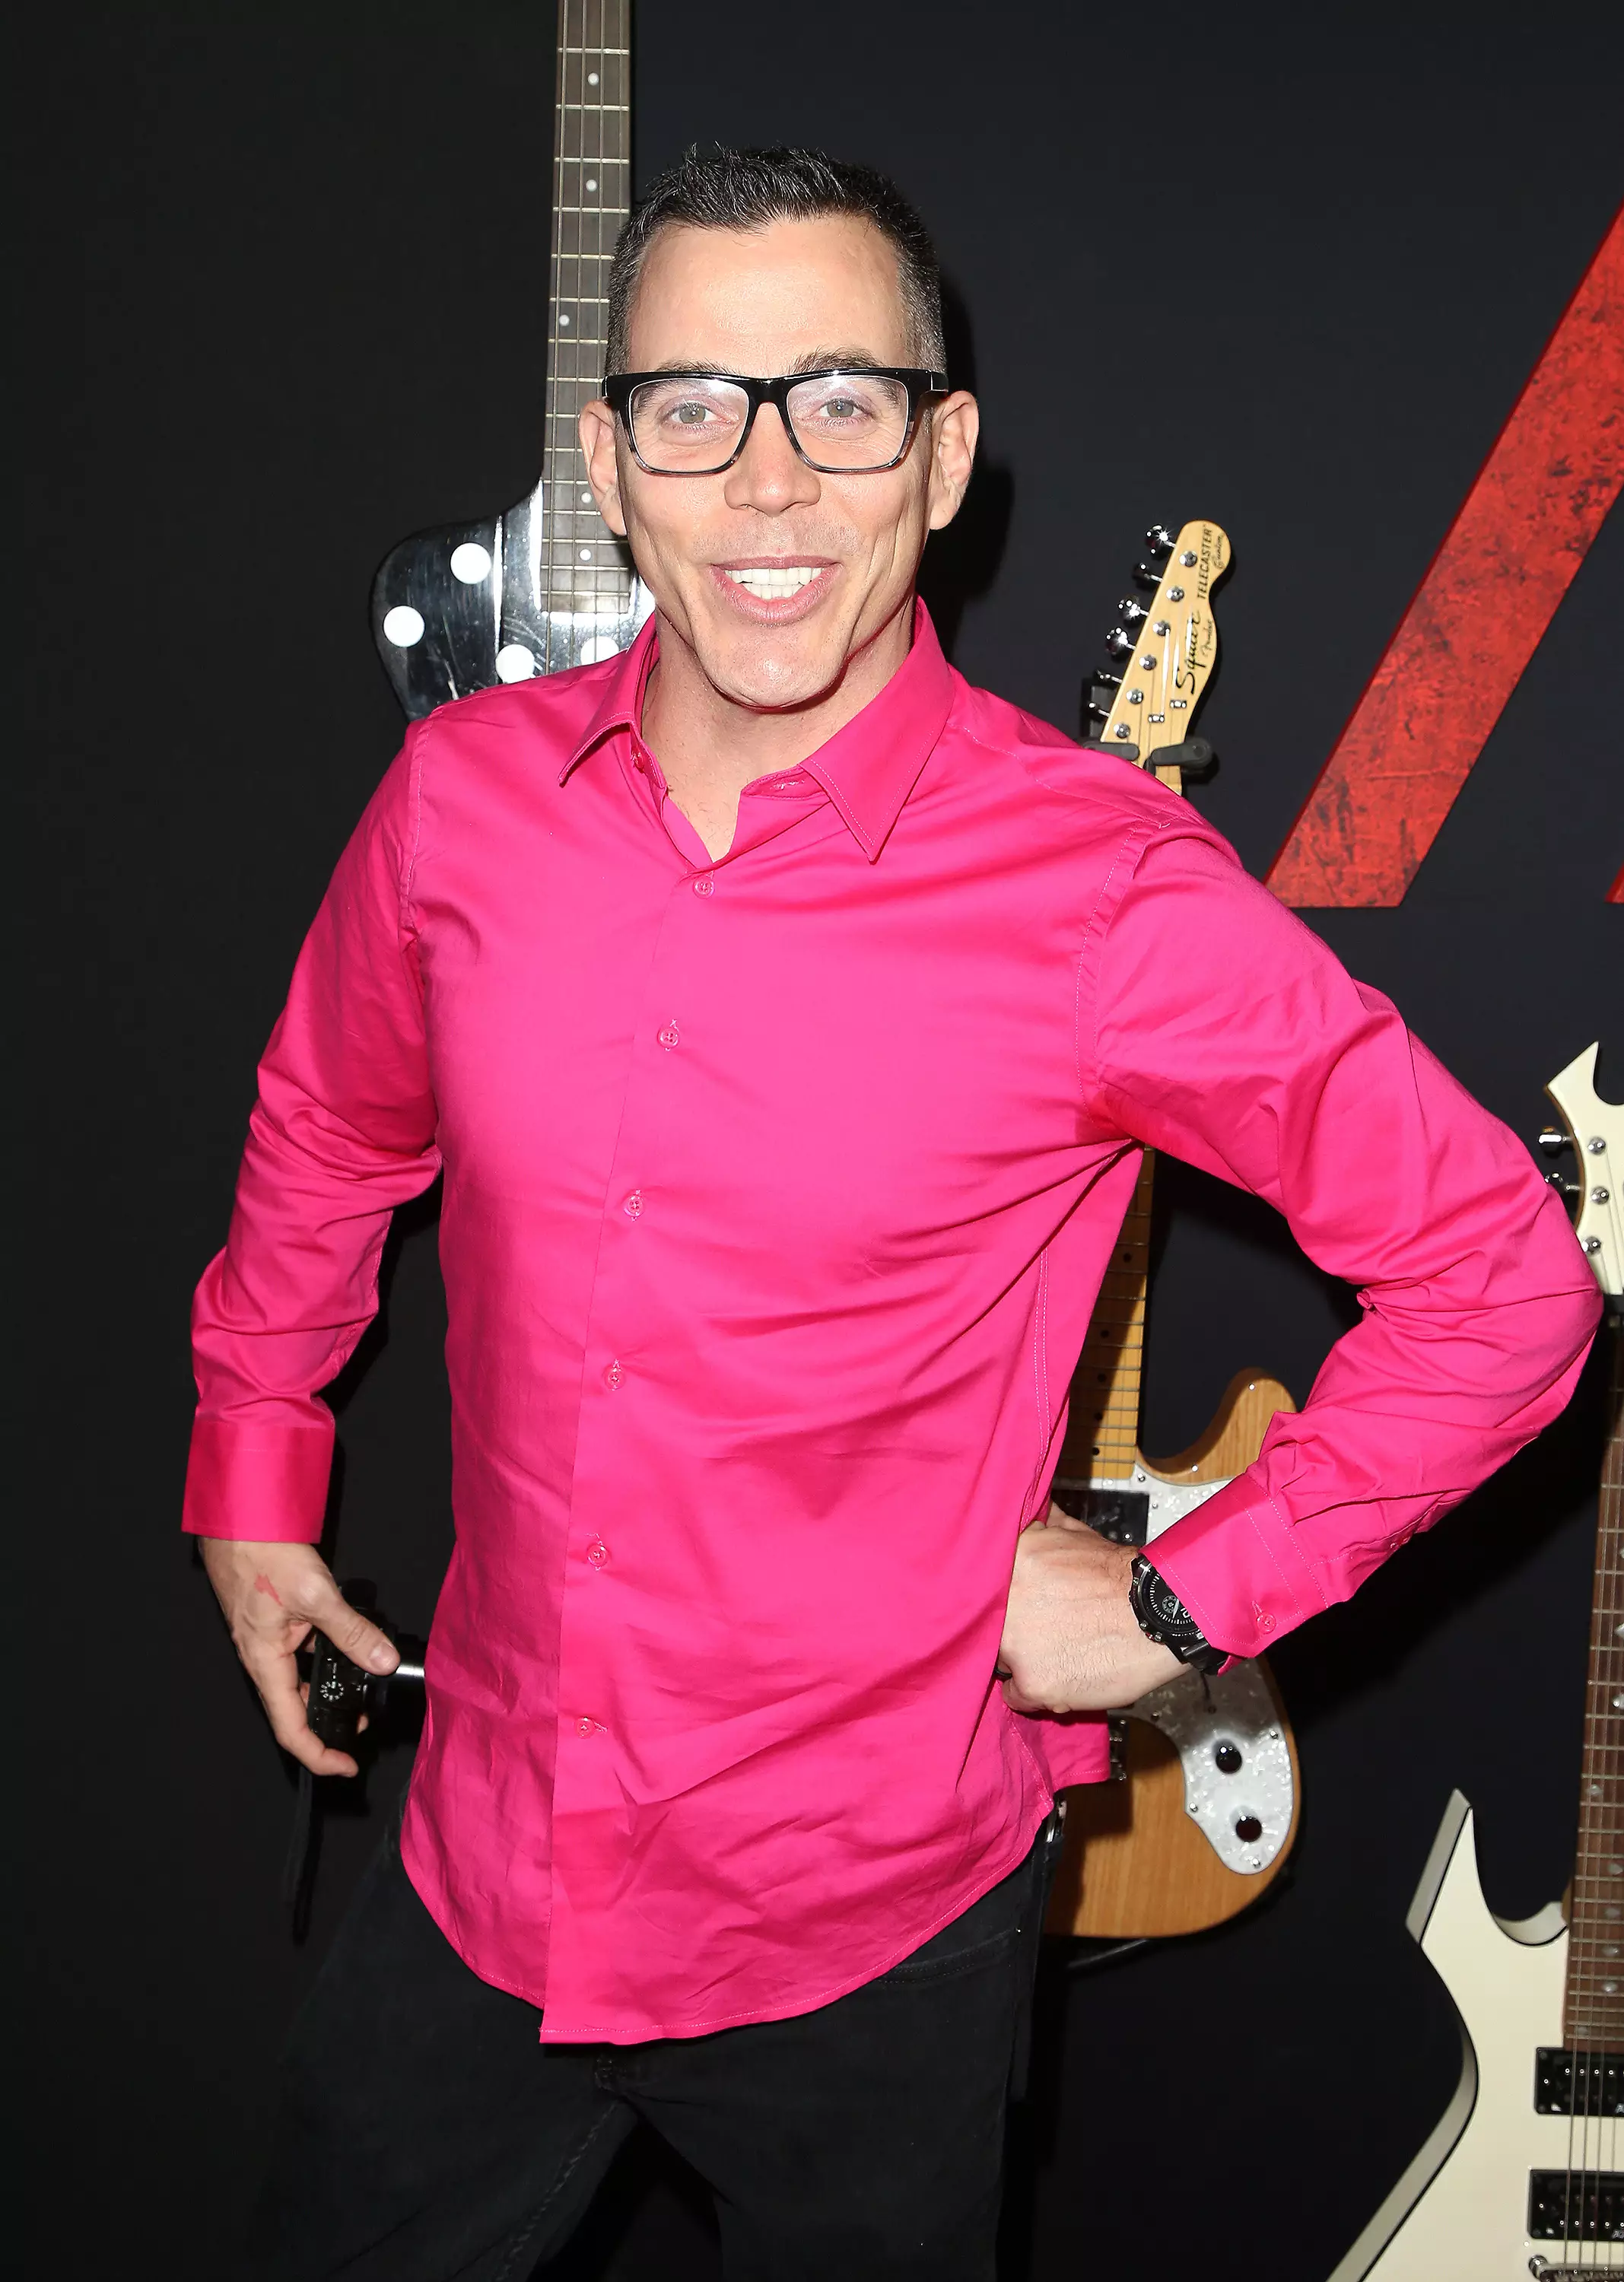 Steve-O says he hasn't received an offer he can accept for a new Jackass movie.